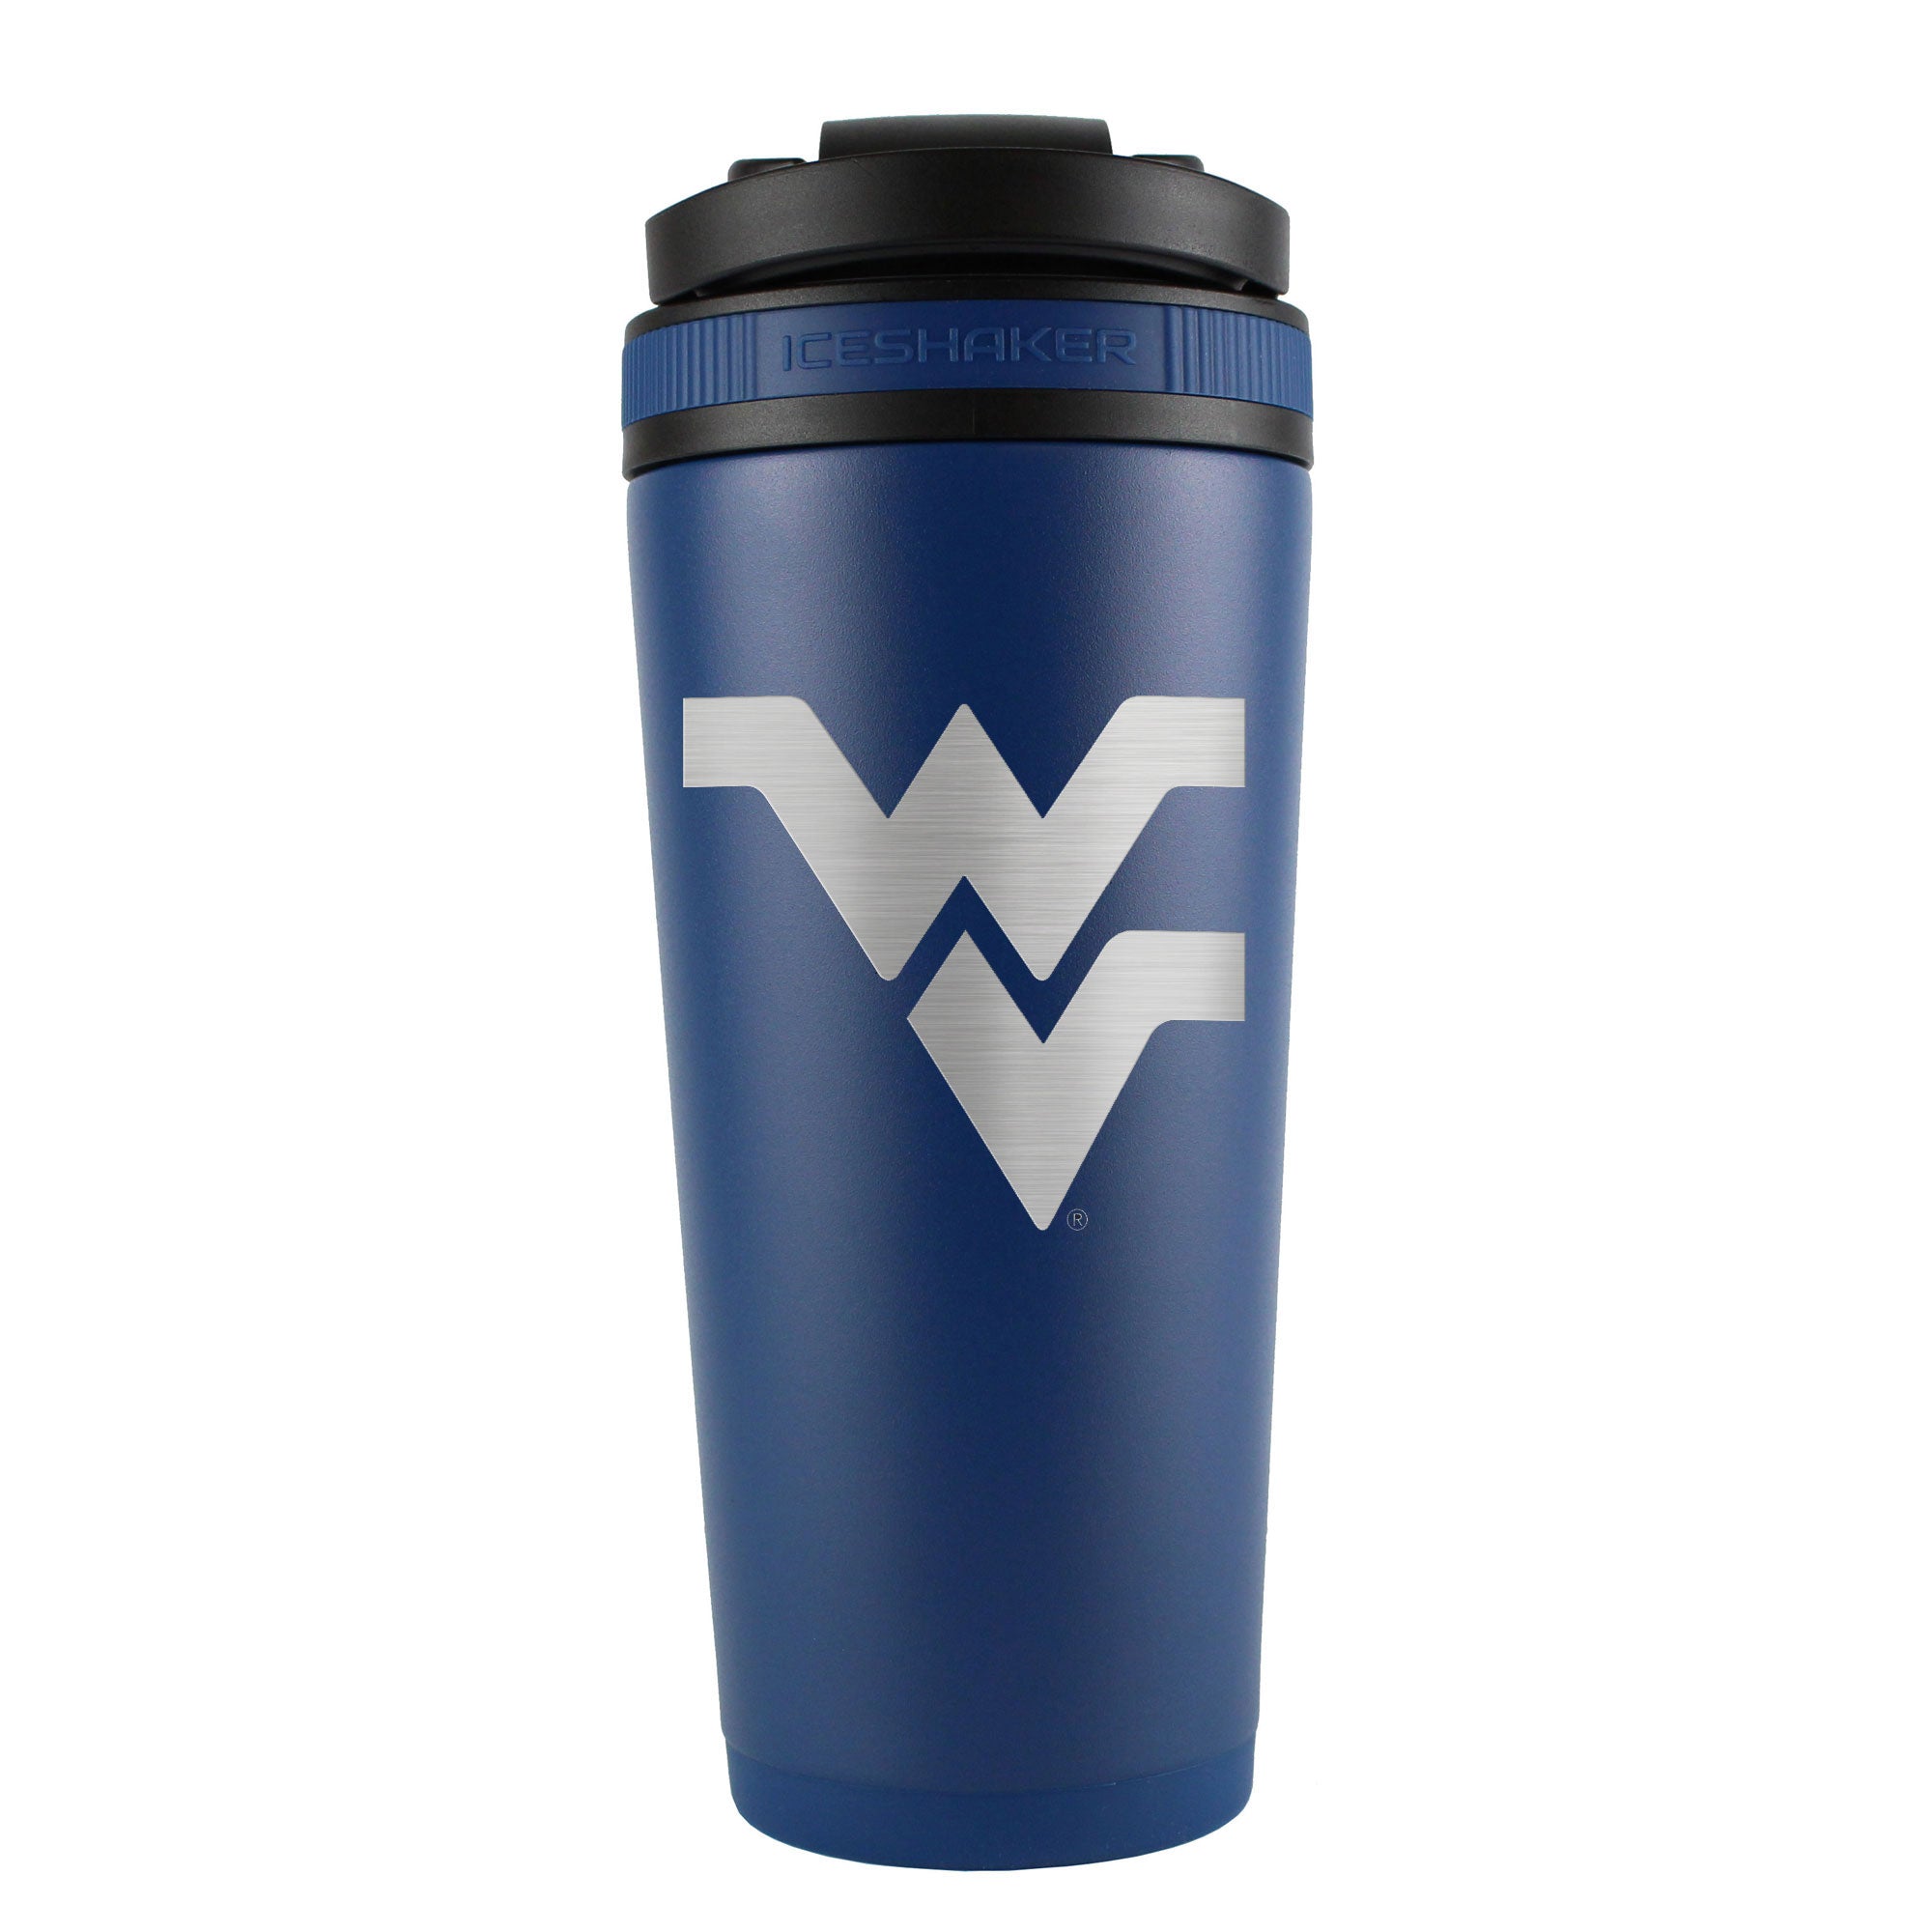 Officially Licensed West Virginia University 26oz Ice Shaker